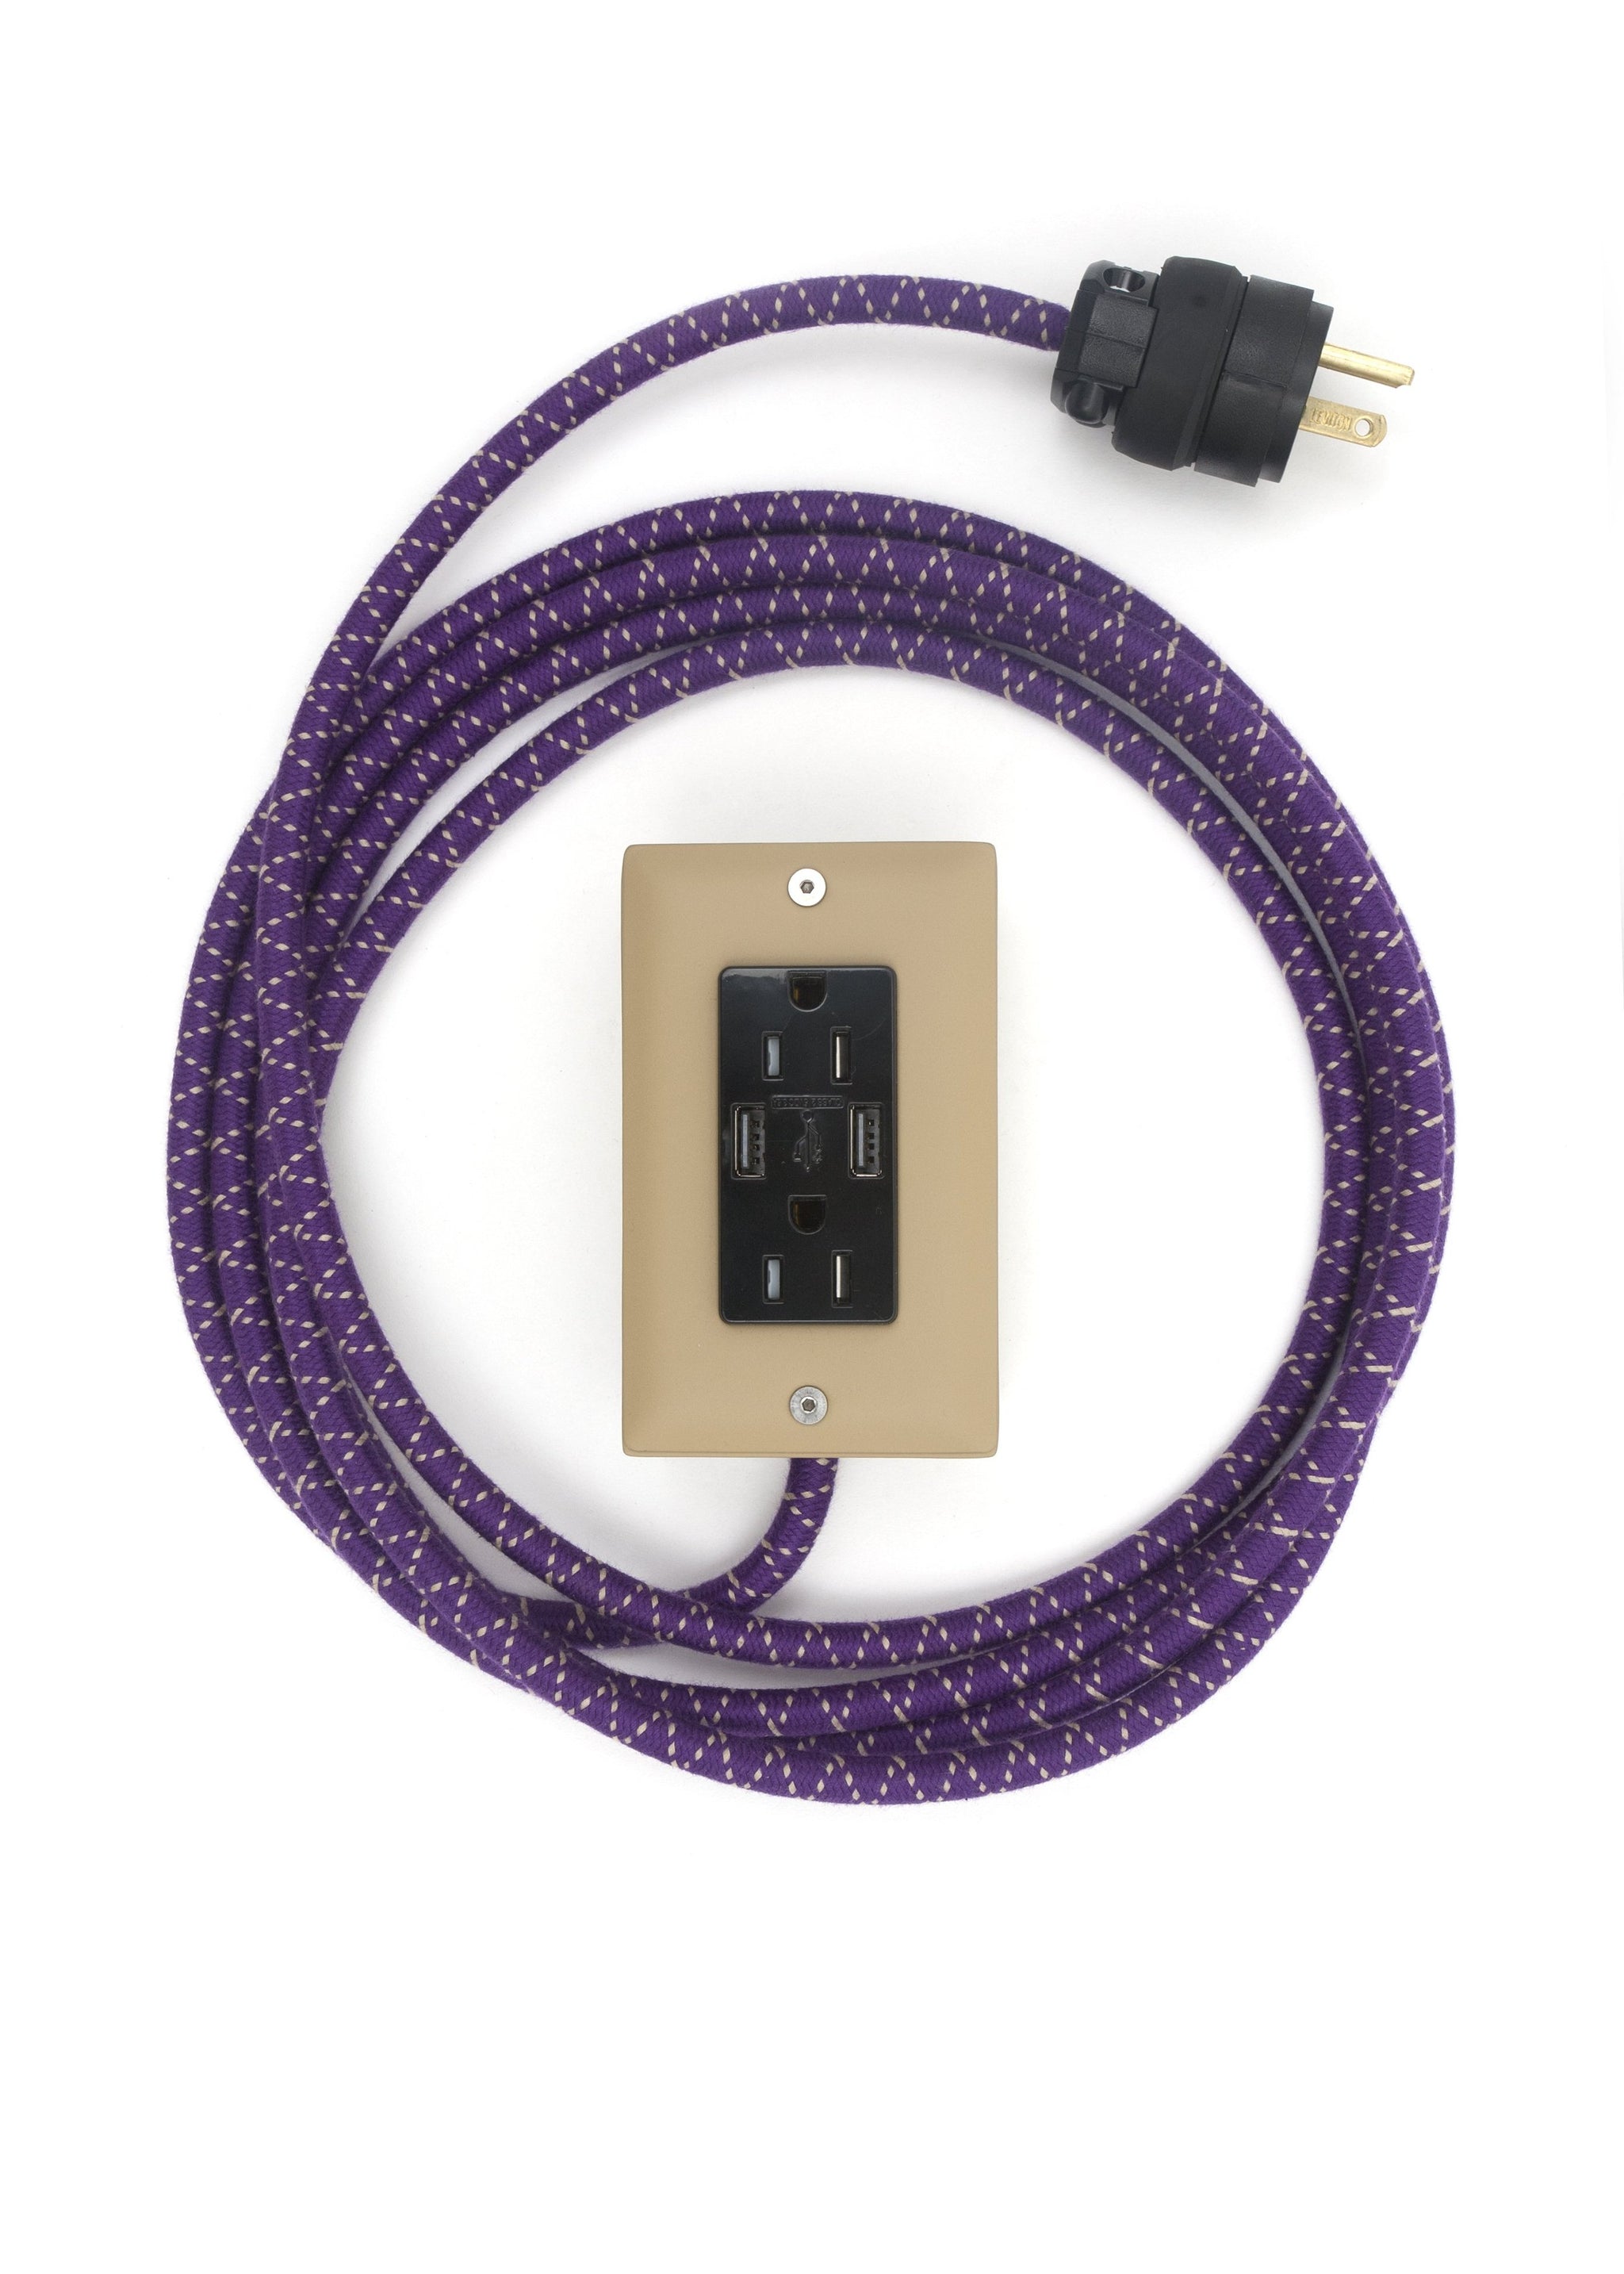 The First Smart Chip Extension Cord - 12' Extō Dual-USB, Dual-Outlet - Ouija Beige